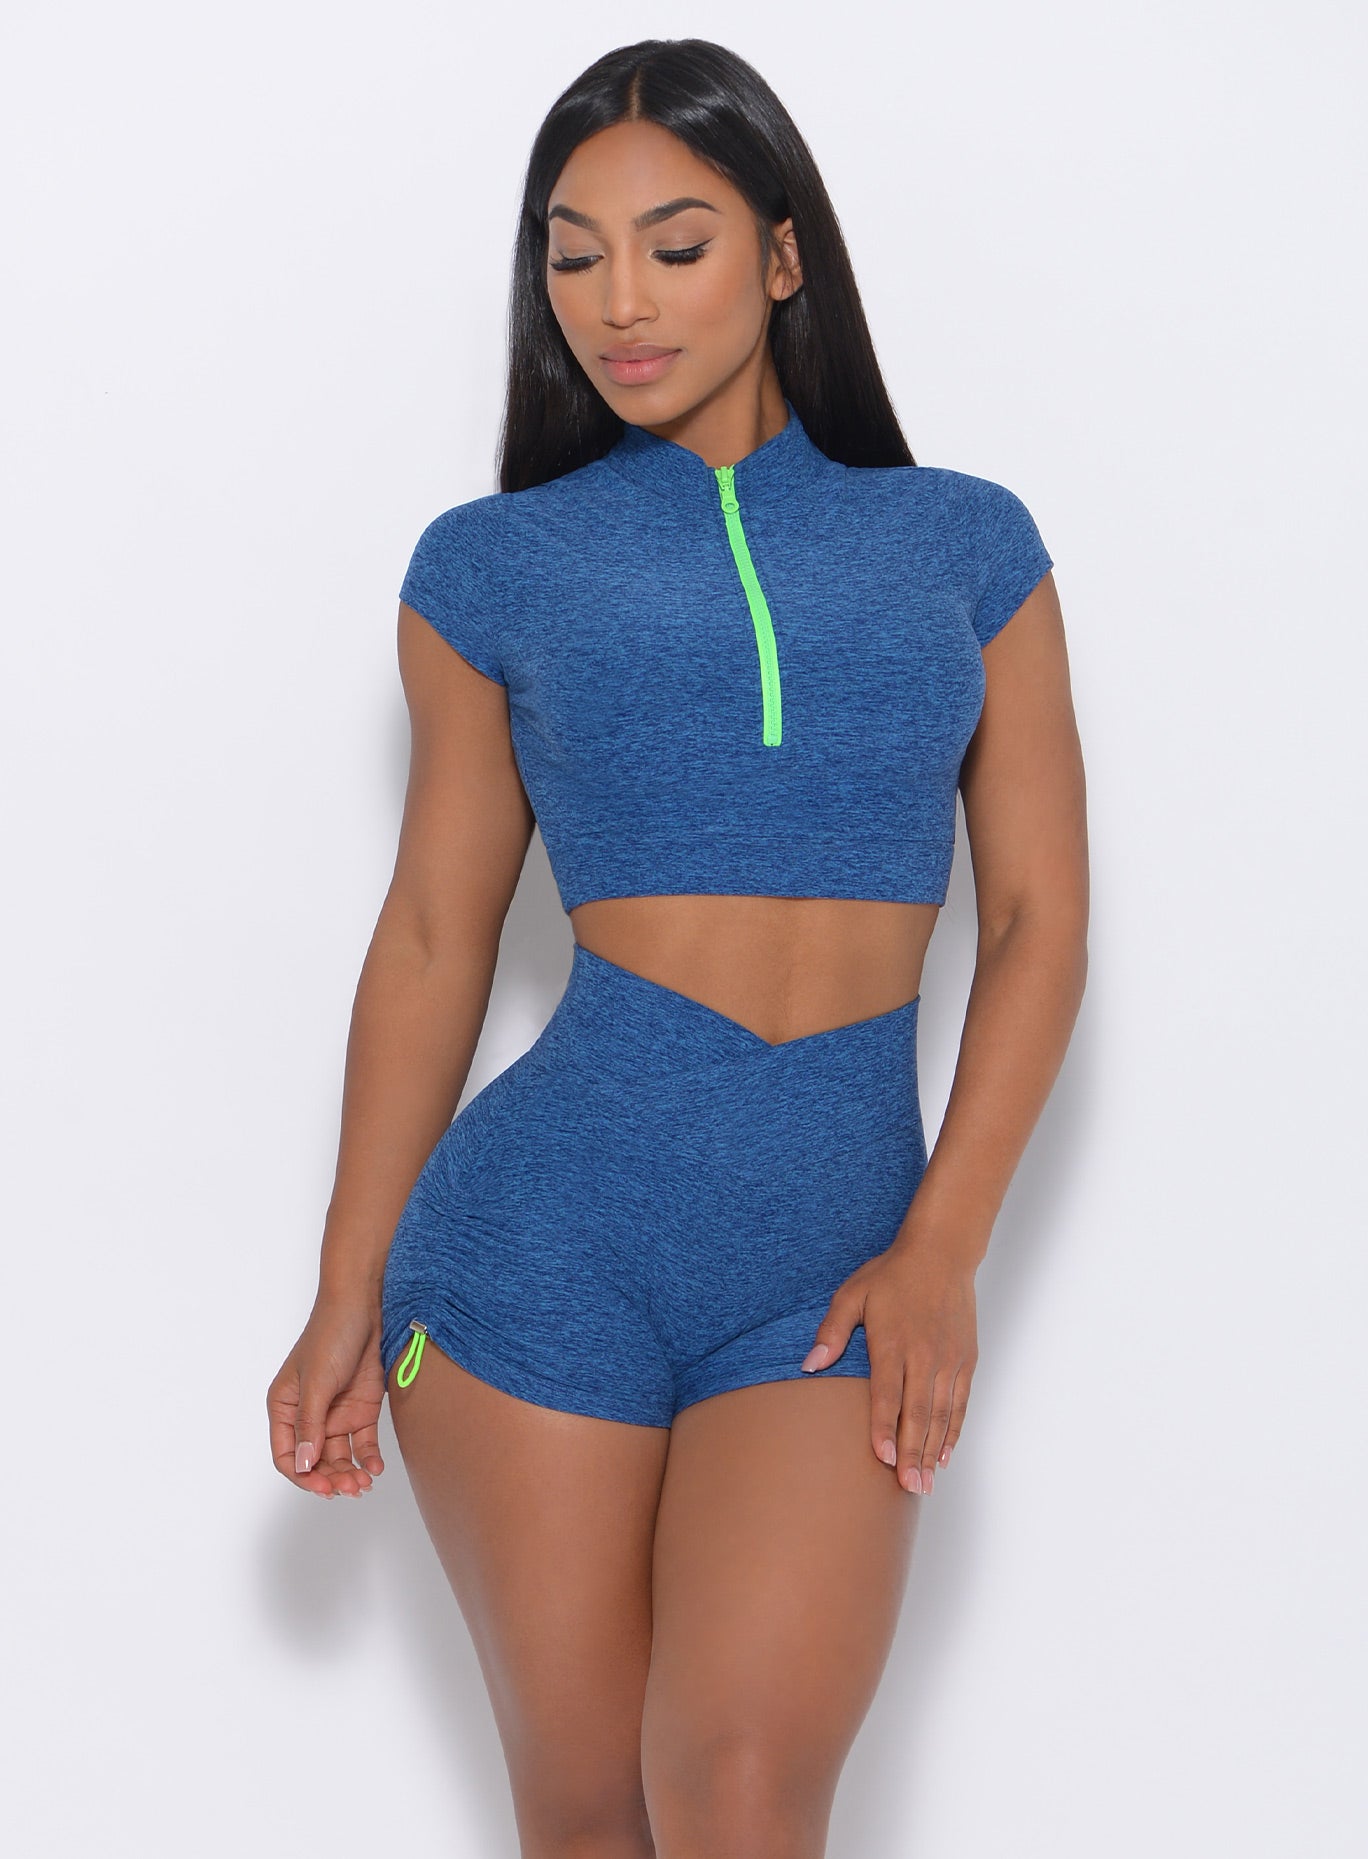 Front view of the model in our neon zip top in ocean color and a matching shorts